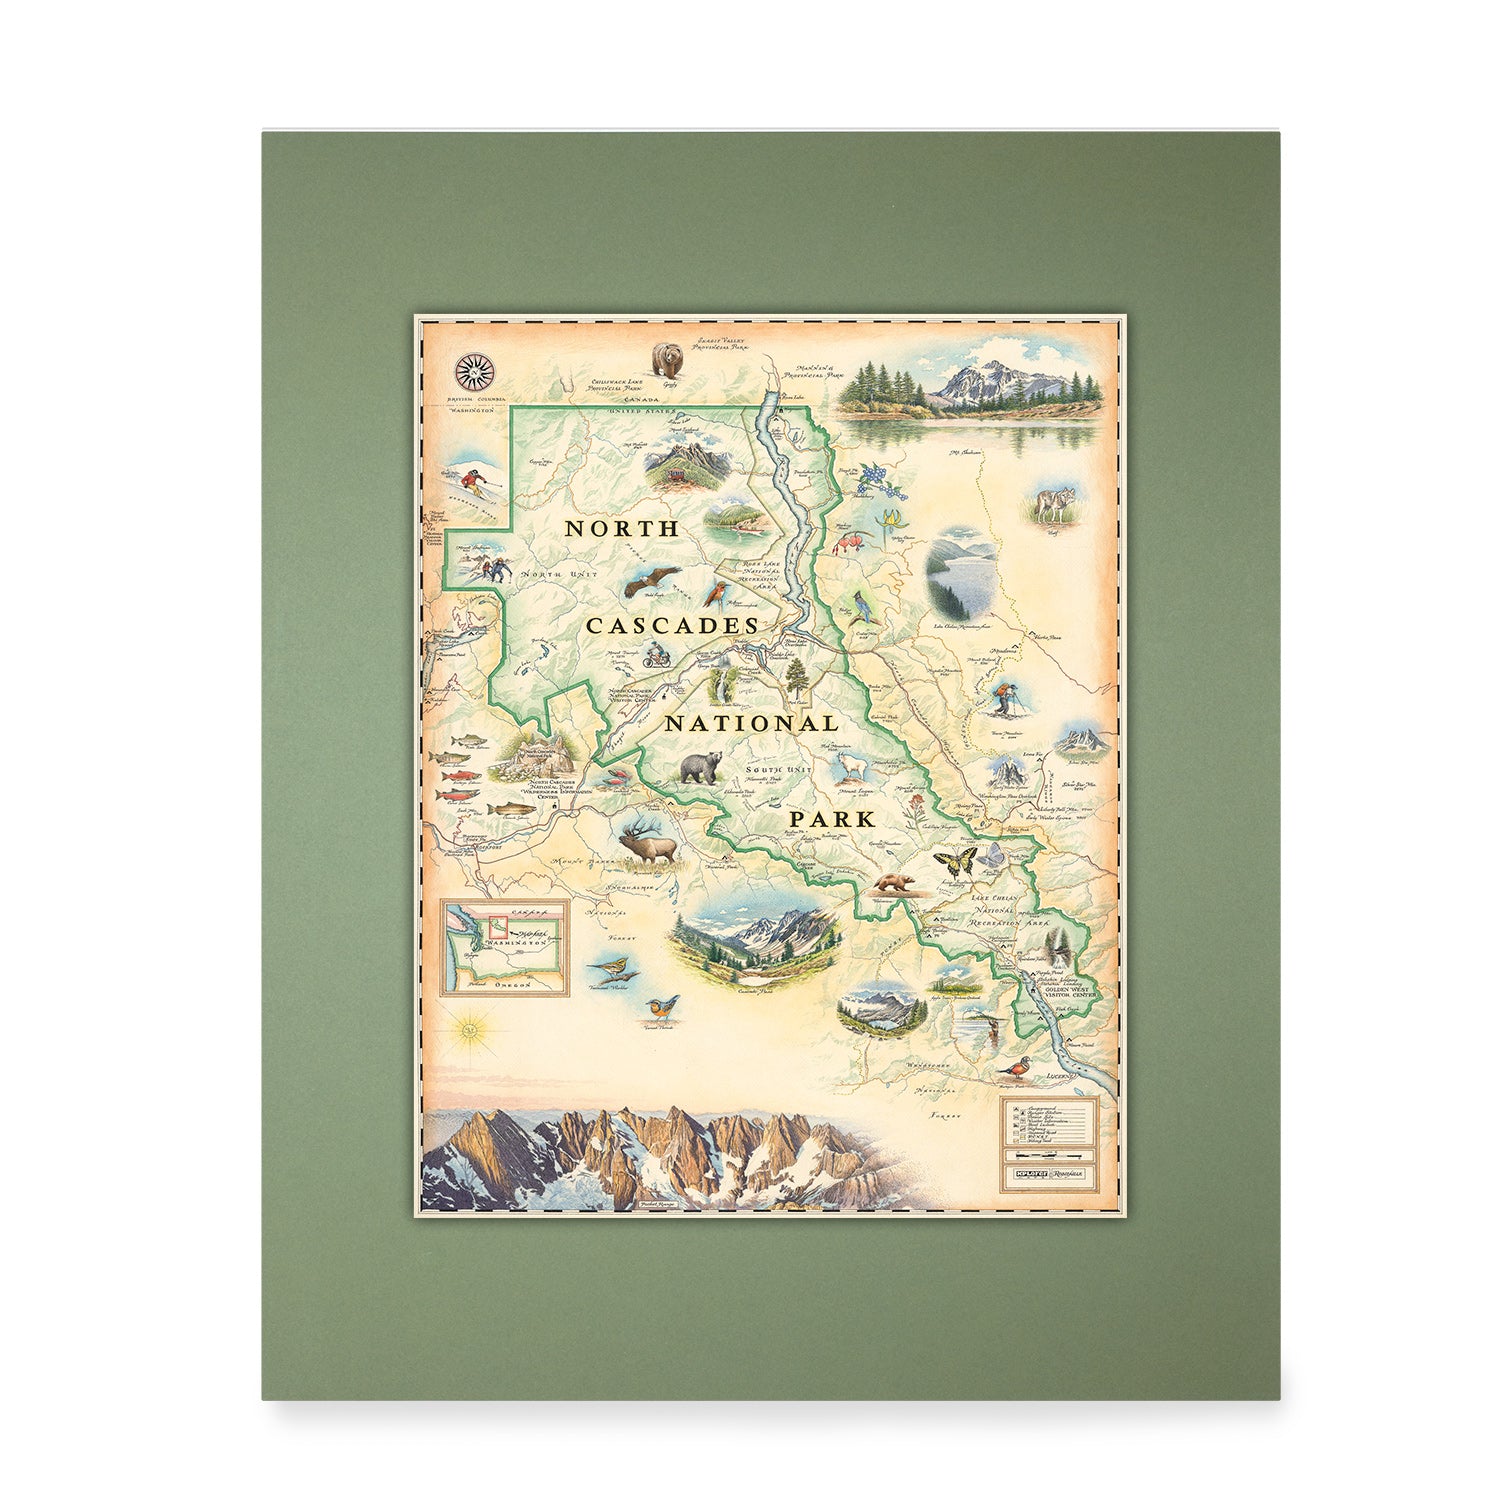 North Cascades National Park Mini-Map by Xplorer Maps. in earth tones beige and green. The map features illustrations of flora and fauna such as black bears, elk, wolverine, glacier lilies, and huckleberries. Other illustrations include Pickett Range, Cascade Pass, and Lake Chelan Recreation area. 